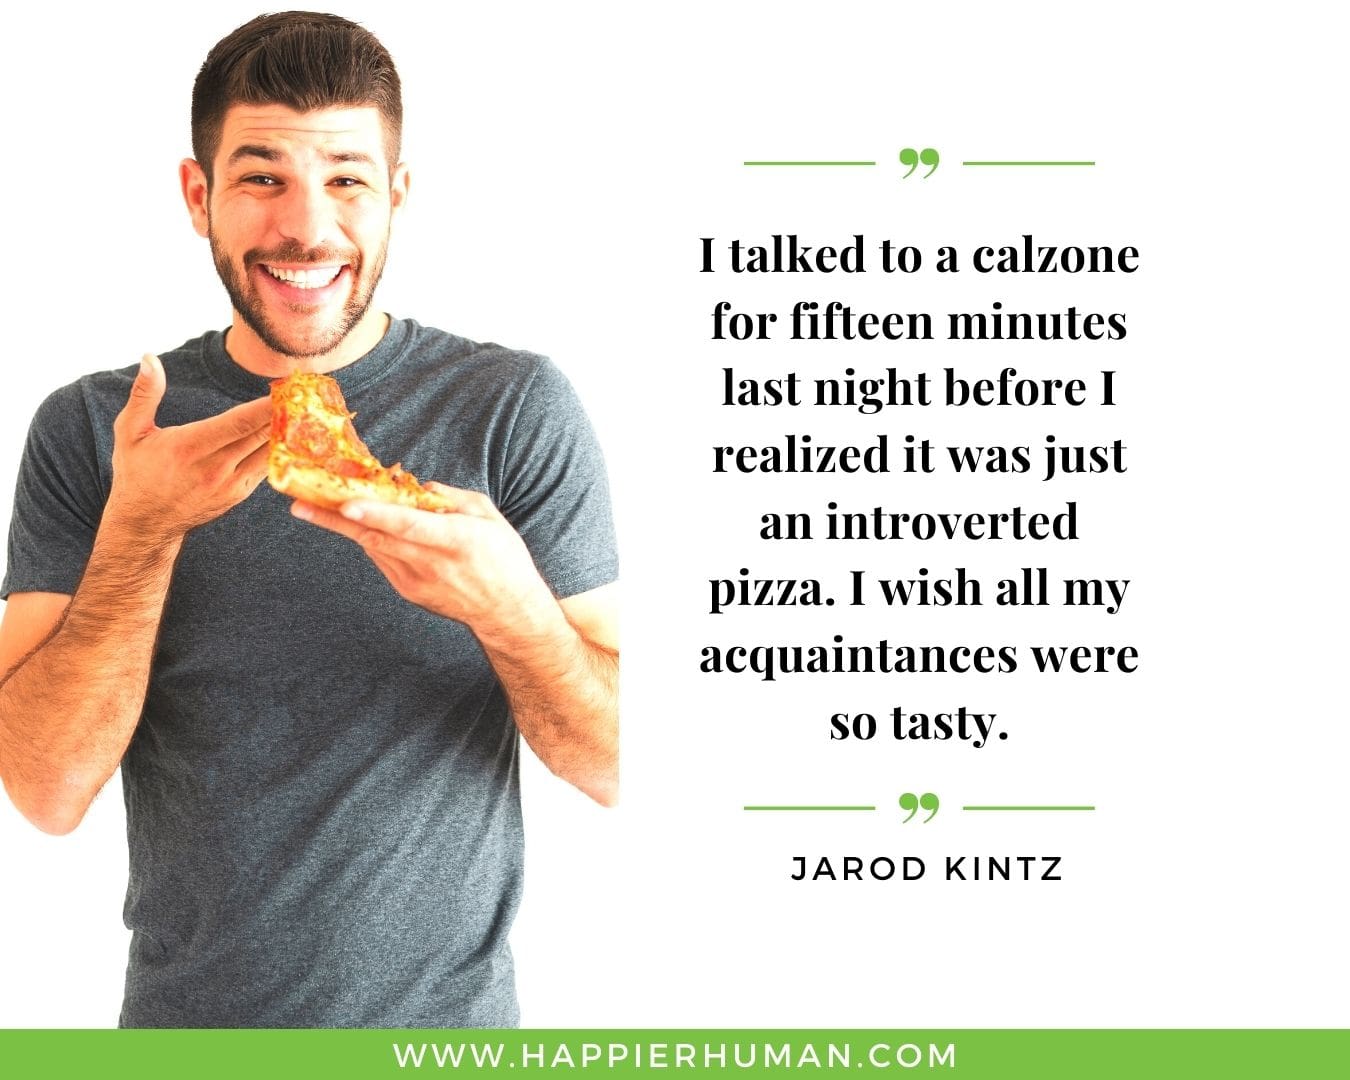 Introvert Quotes - “I talked to a calzone for fifteen minutes last night before I realized it was just an introverted pizza. I wish all my acquaintances were so tasty.” – Jarod Kintz